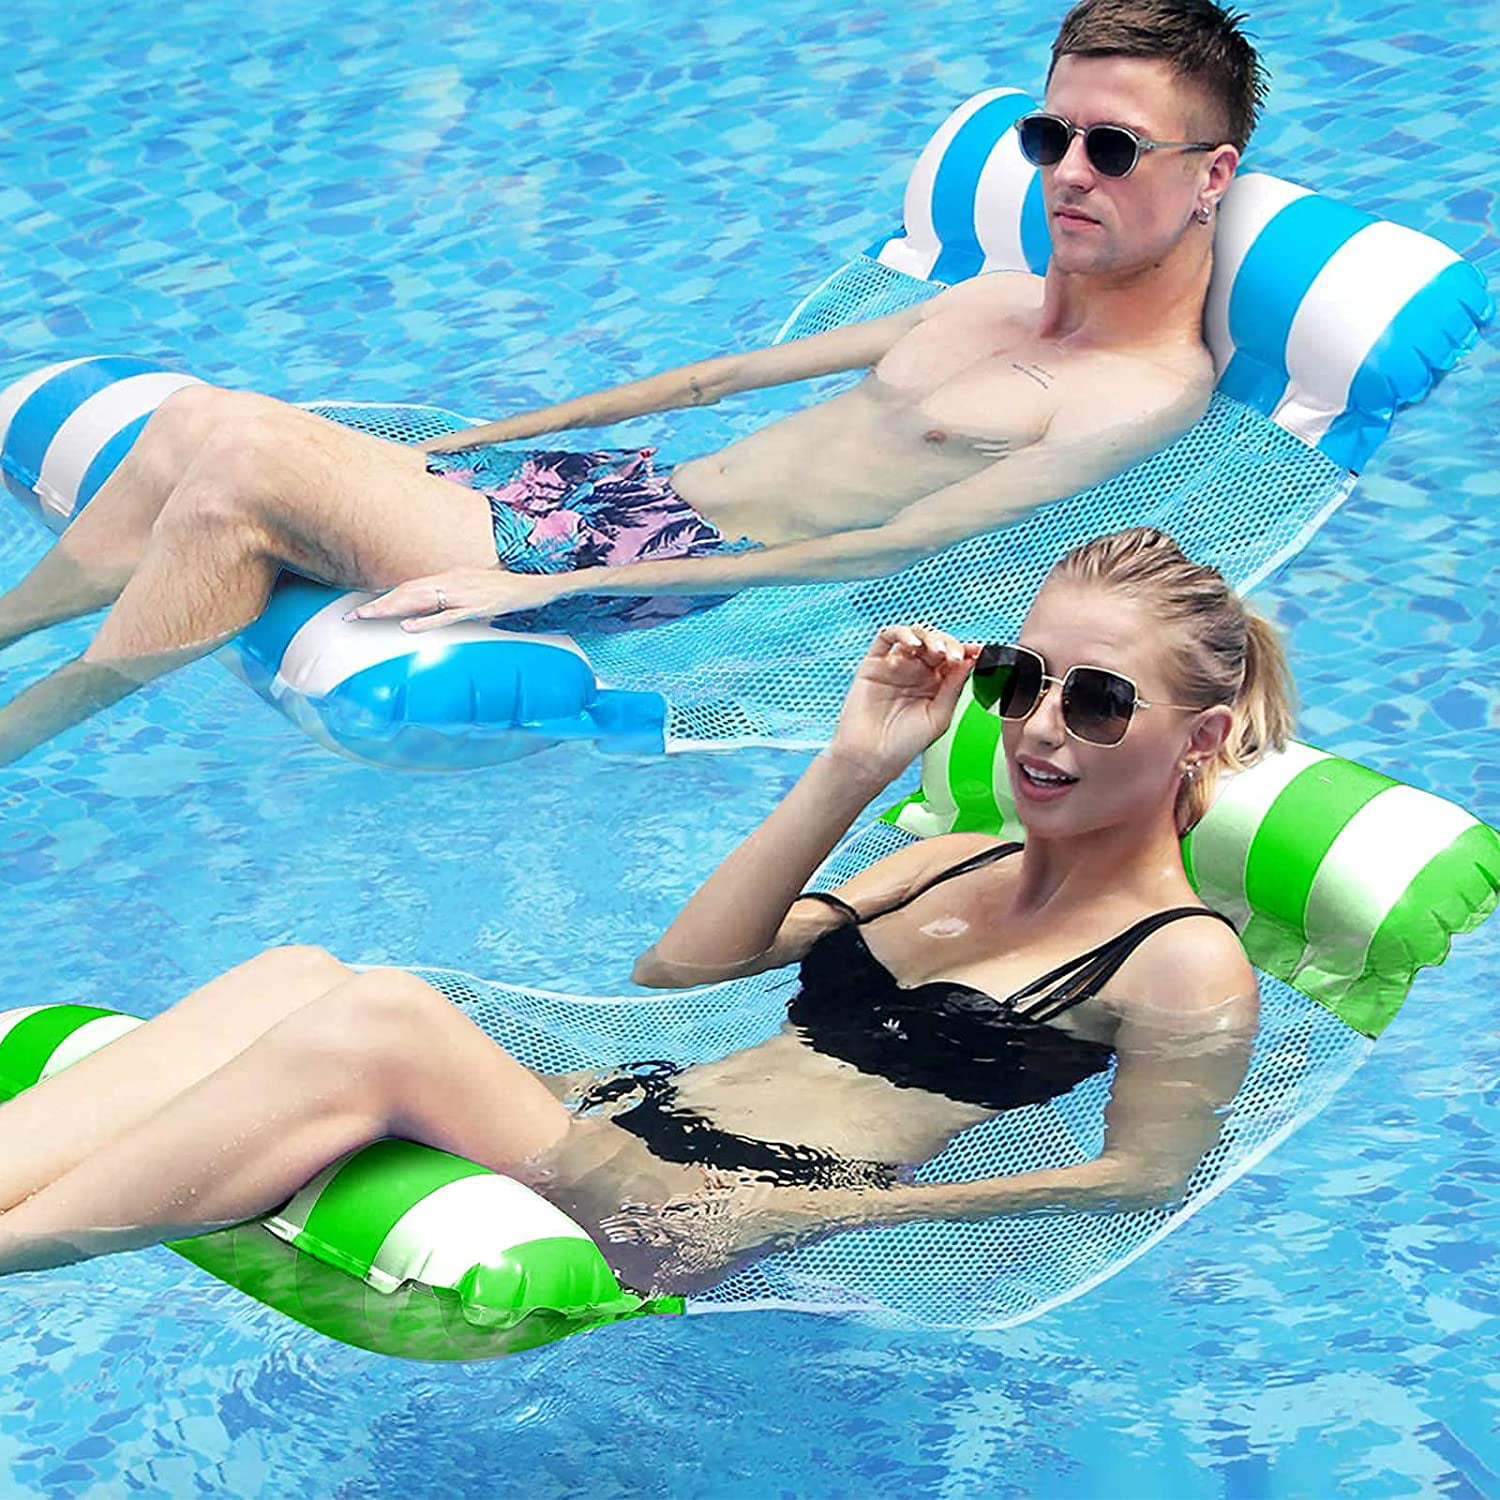 Details about   Adult Inflatable Water Hammock Floating Bed Lounge Chair Drifter Swimming Pool 